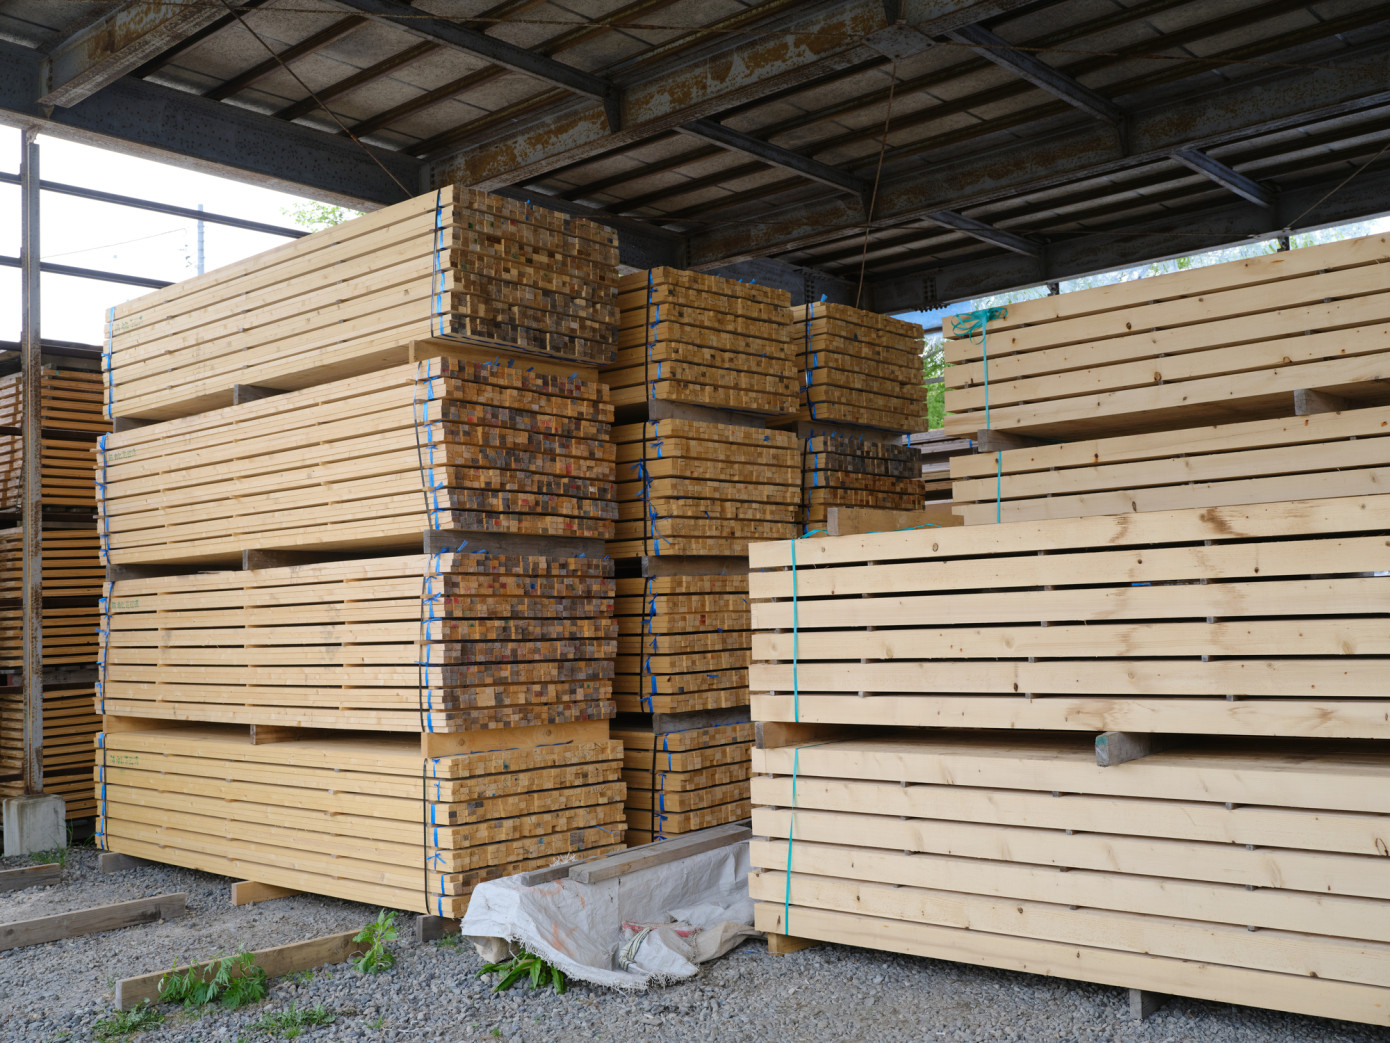 Increased demand pushes up many lumber prices